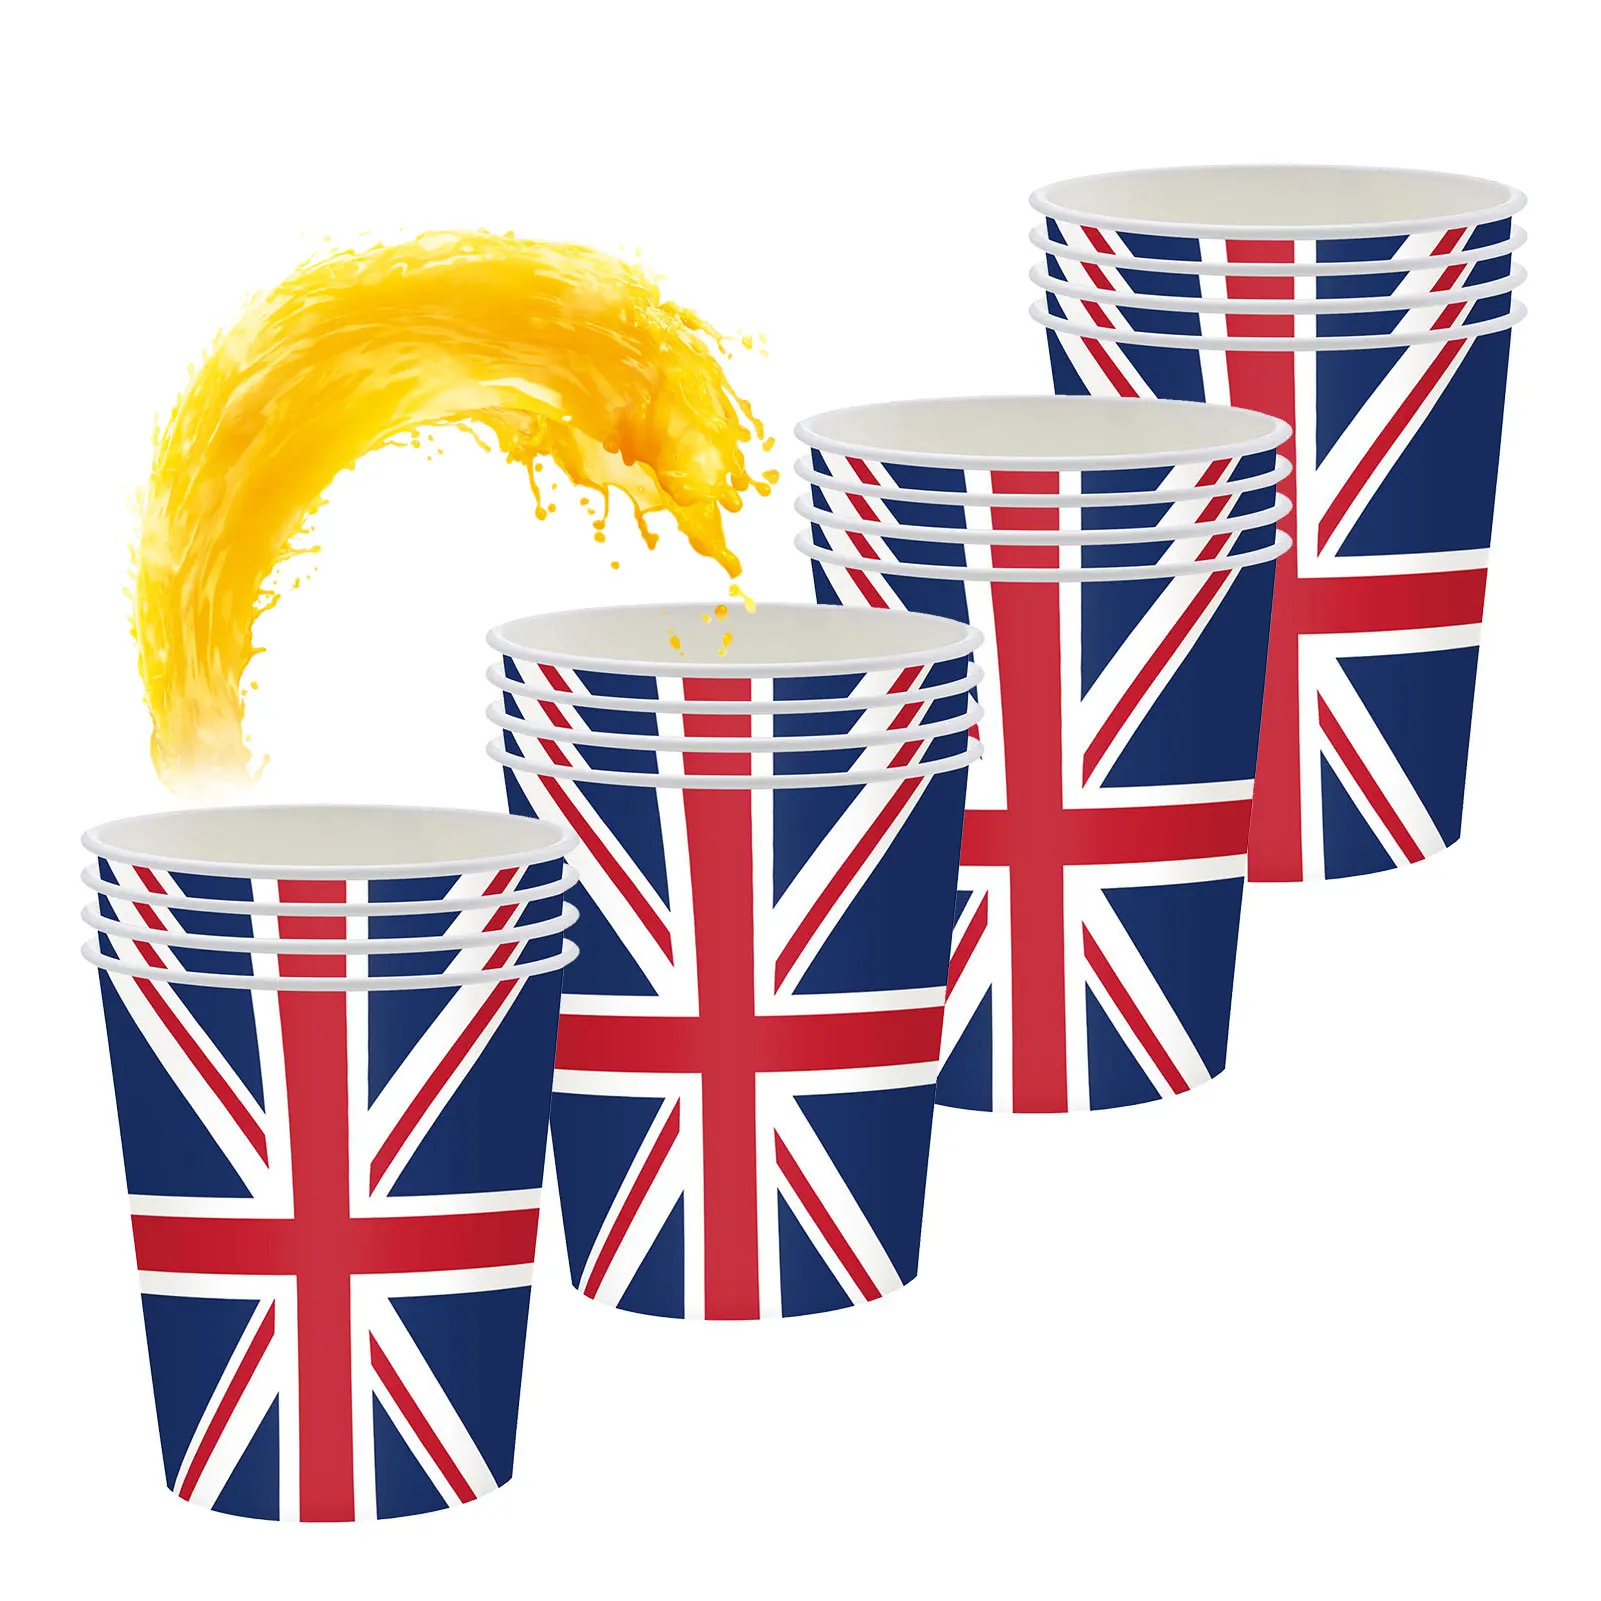 

16pcs Britain Paper Plates Cups And Napkins, British Flag Paper Tableware Kit Union Jack Themed Plate Tissue Cups